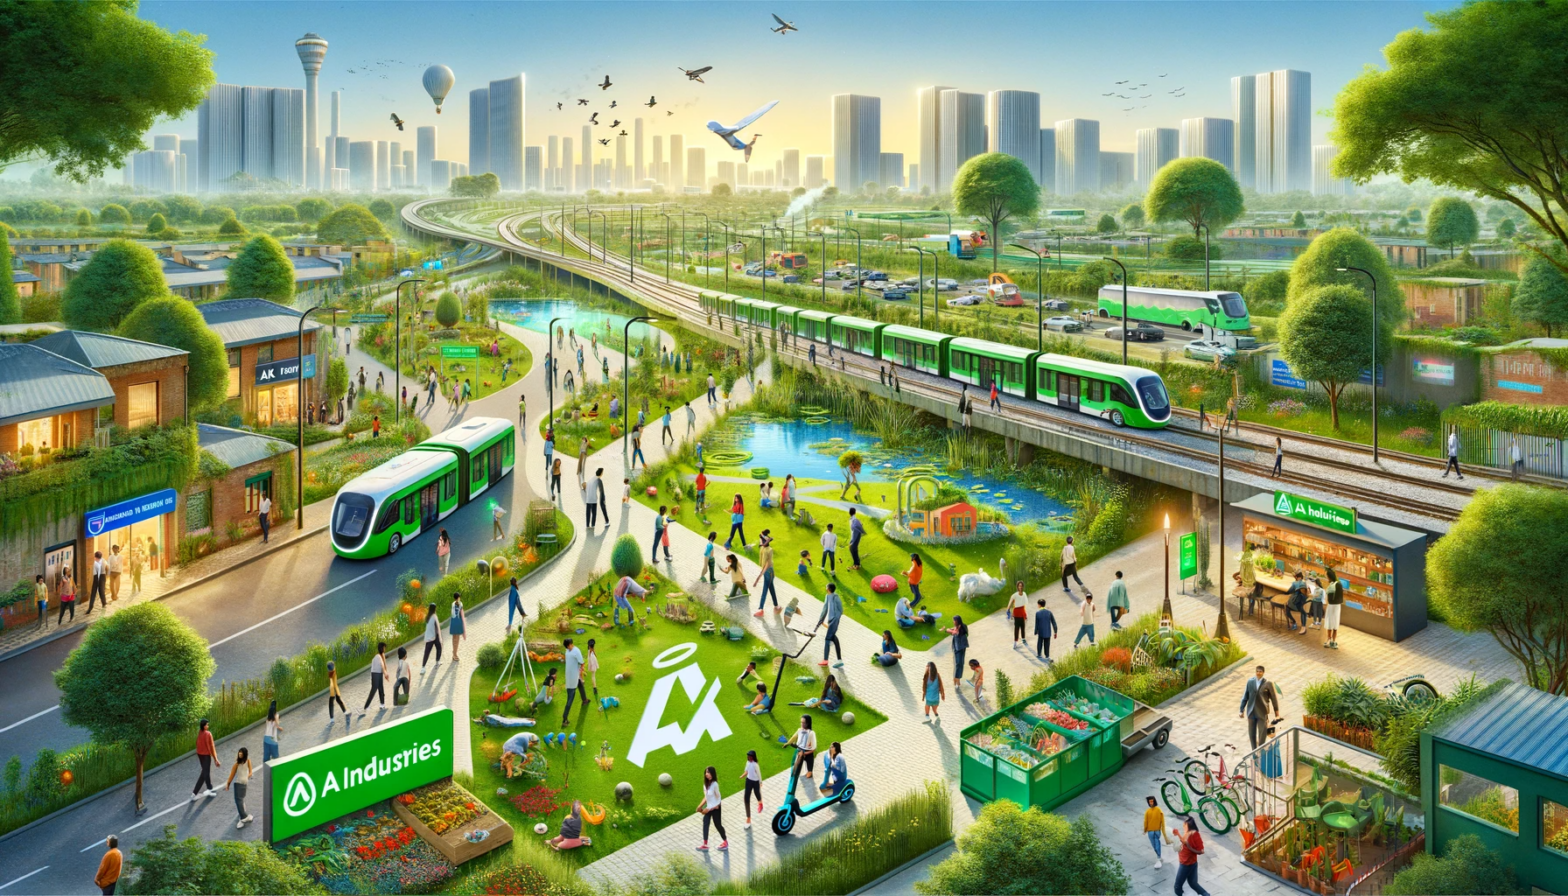 Urban landscape with green parks, electric transportation, and recycling centers by AK Industries.